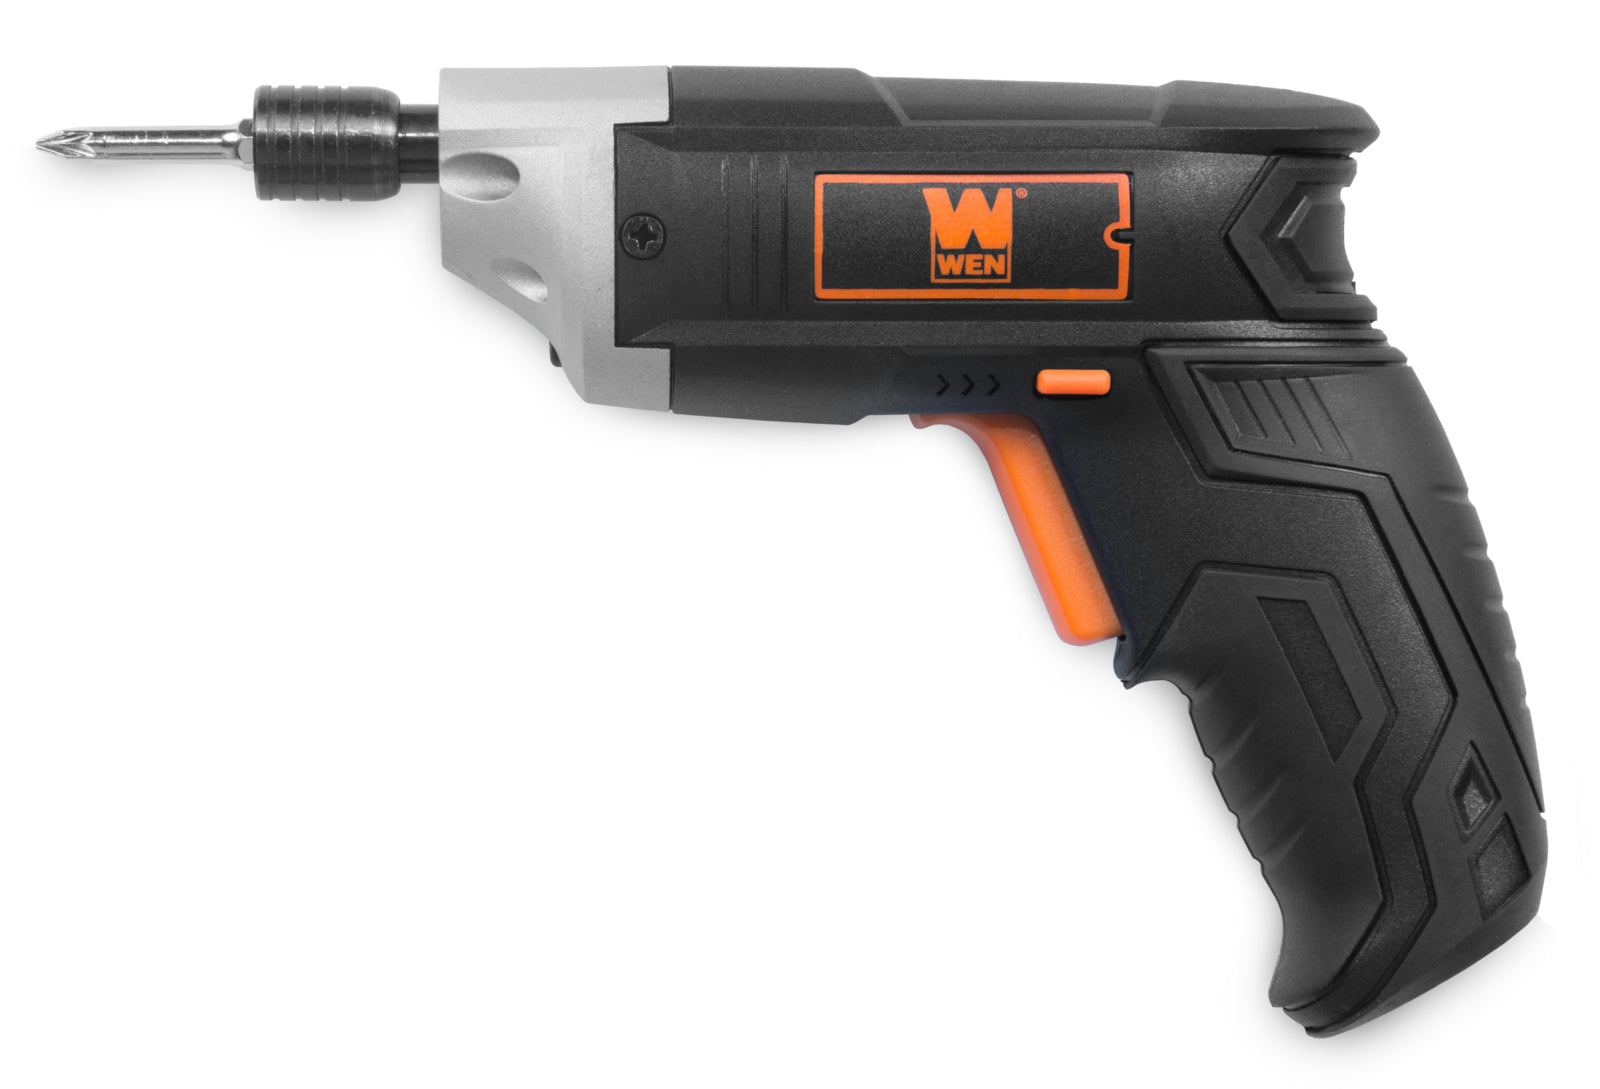 WEN 3.6V Lithium-Ion Cordless Electric Screwdriver with Bits and Belt Holster